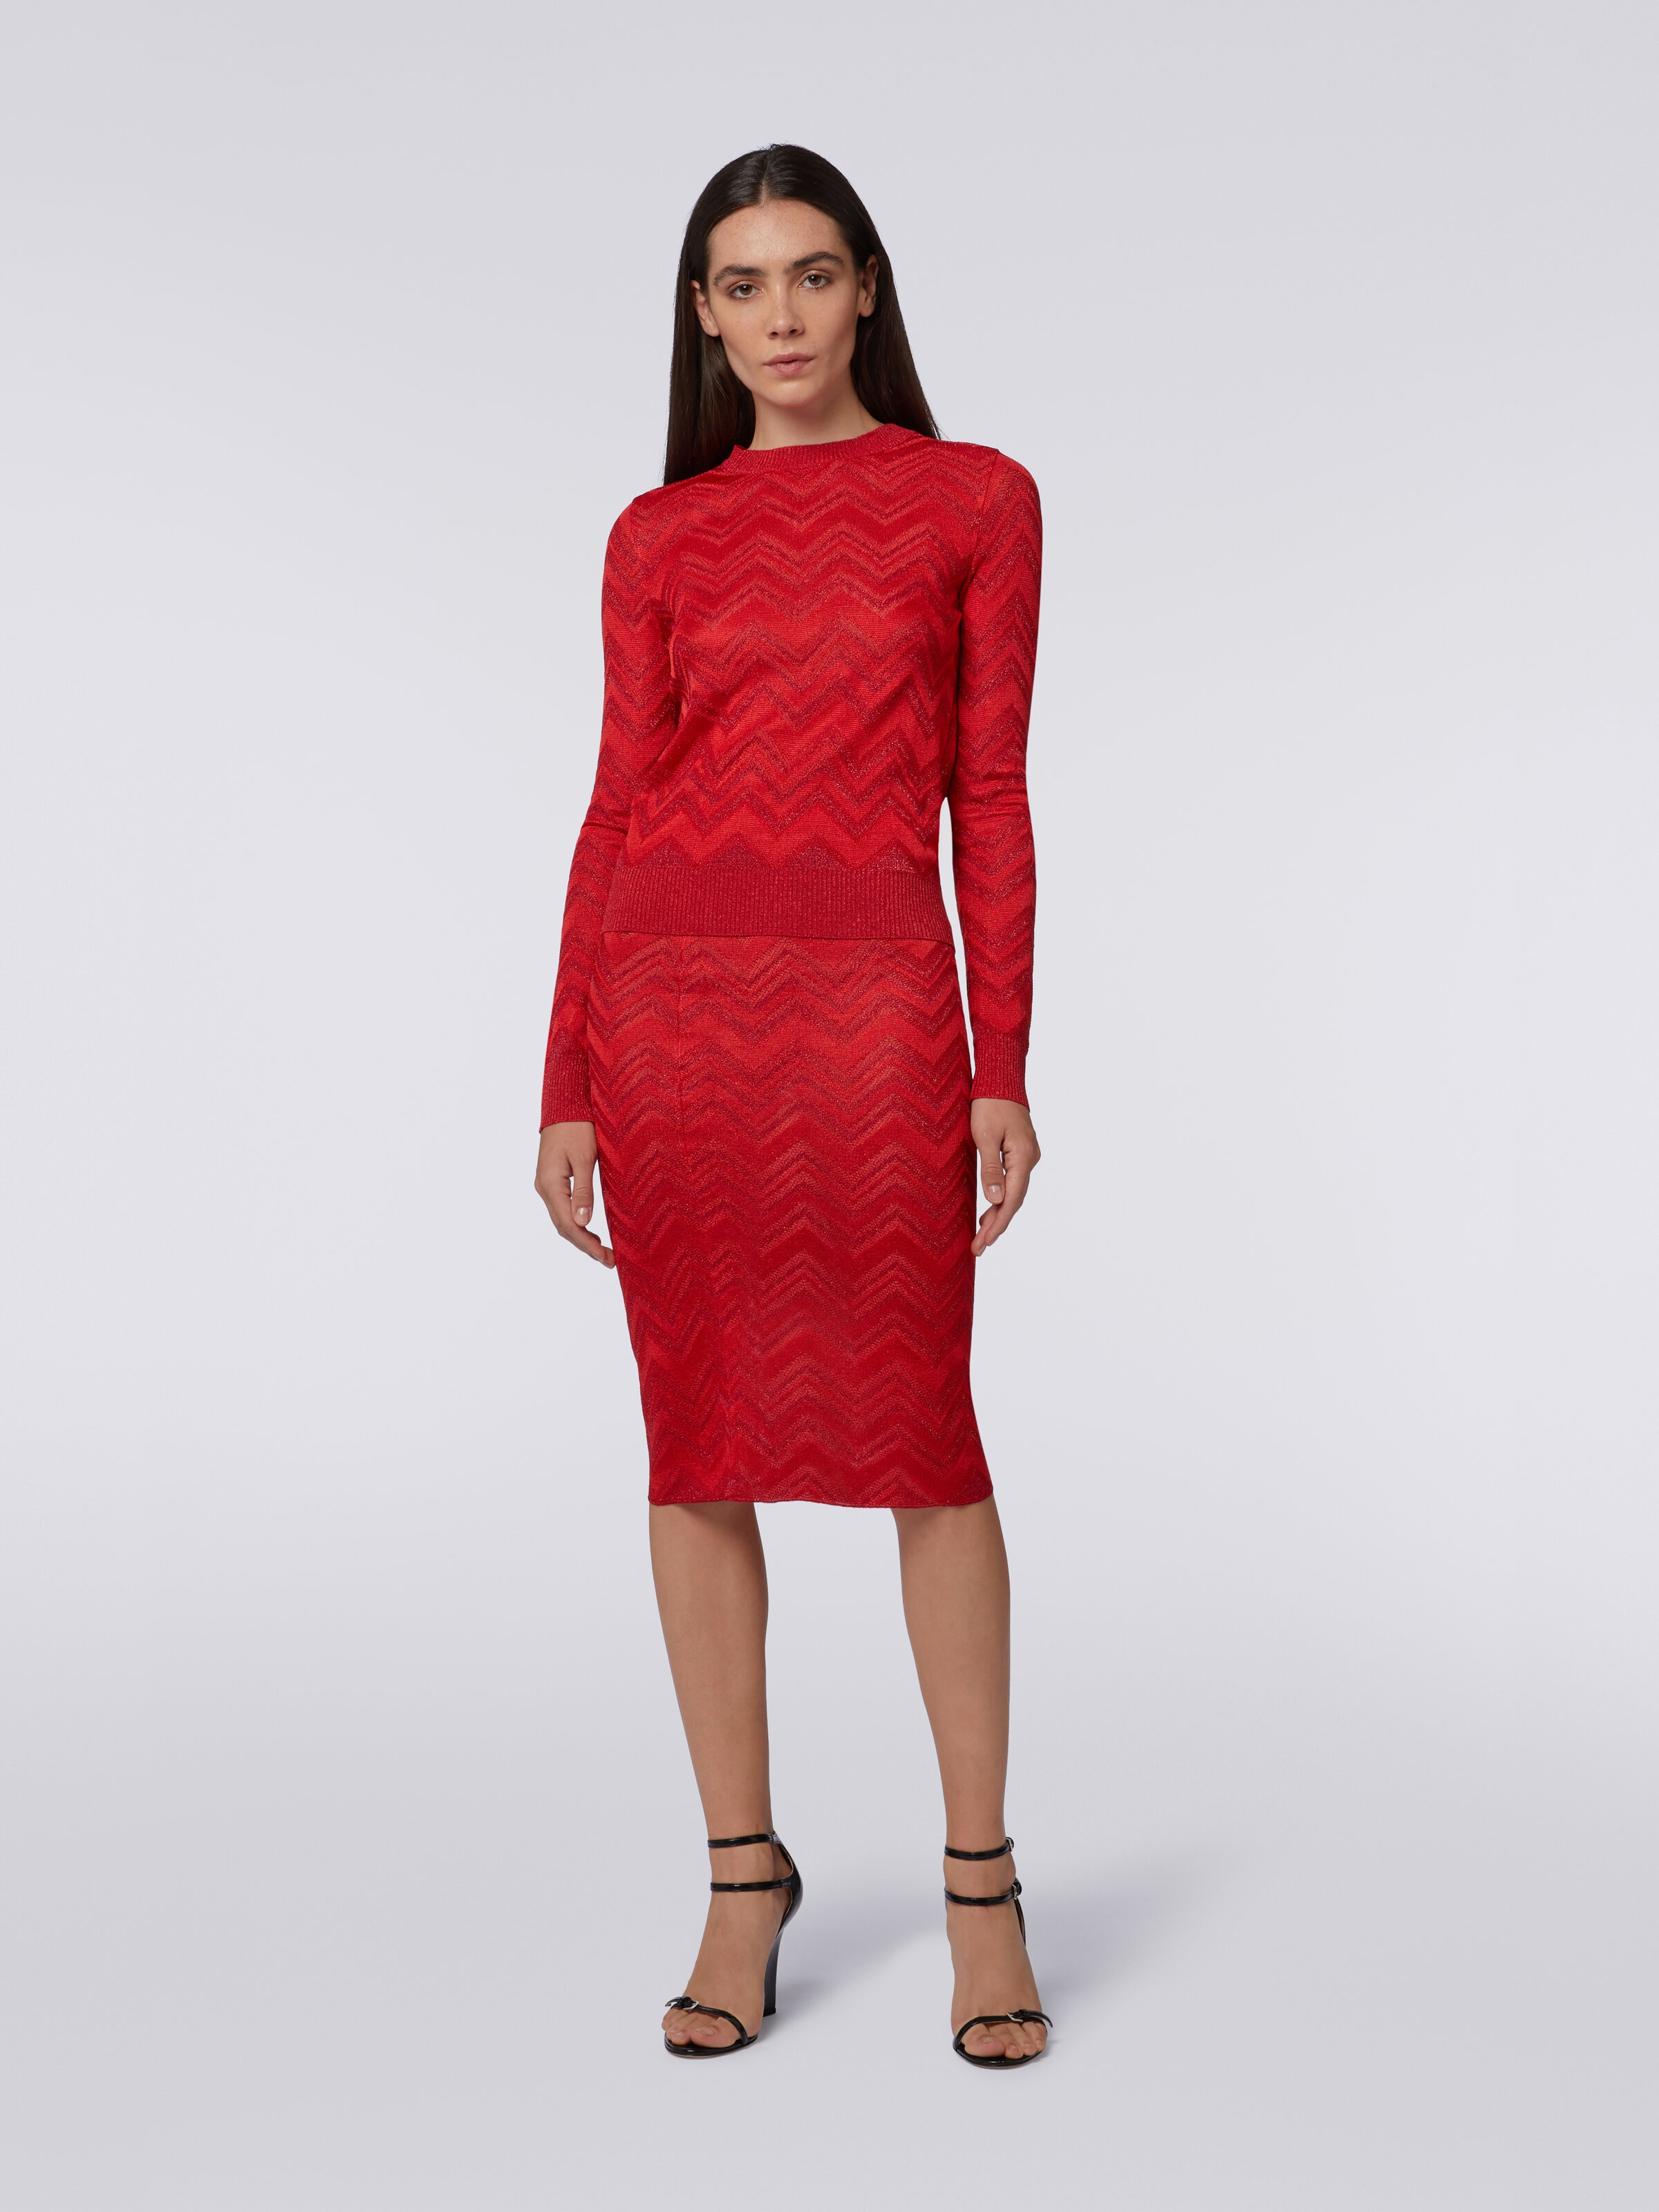 Longuette skirt in zigzag knit with lurex, Red  - 1